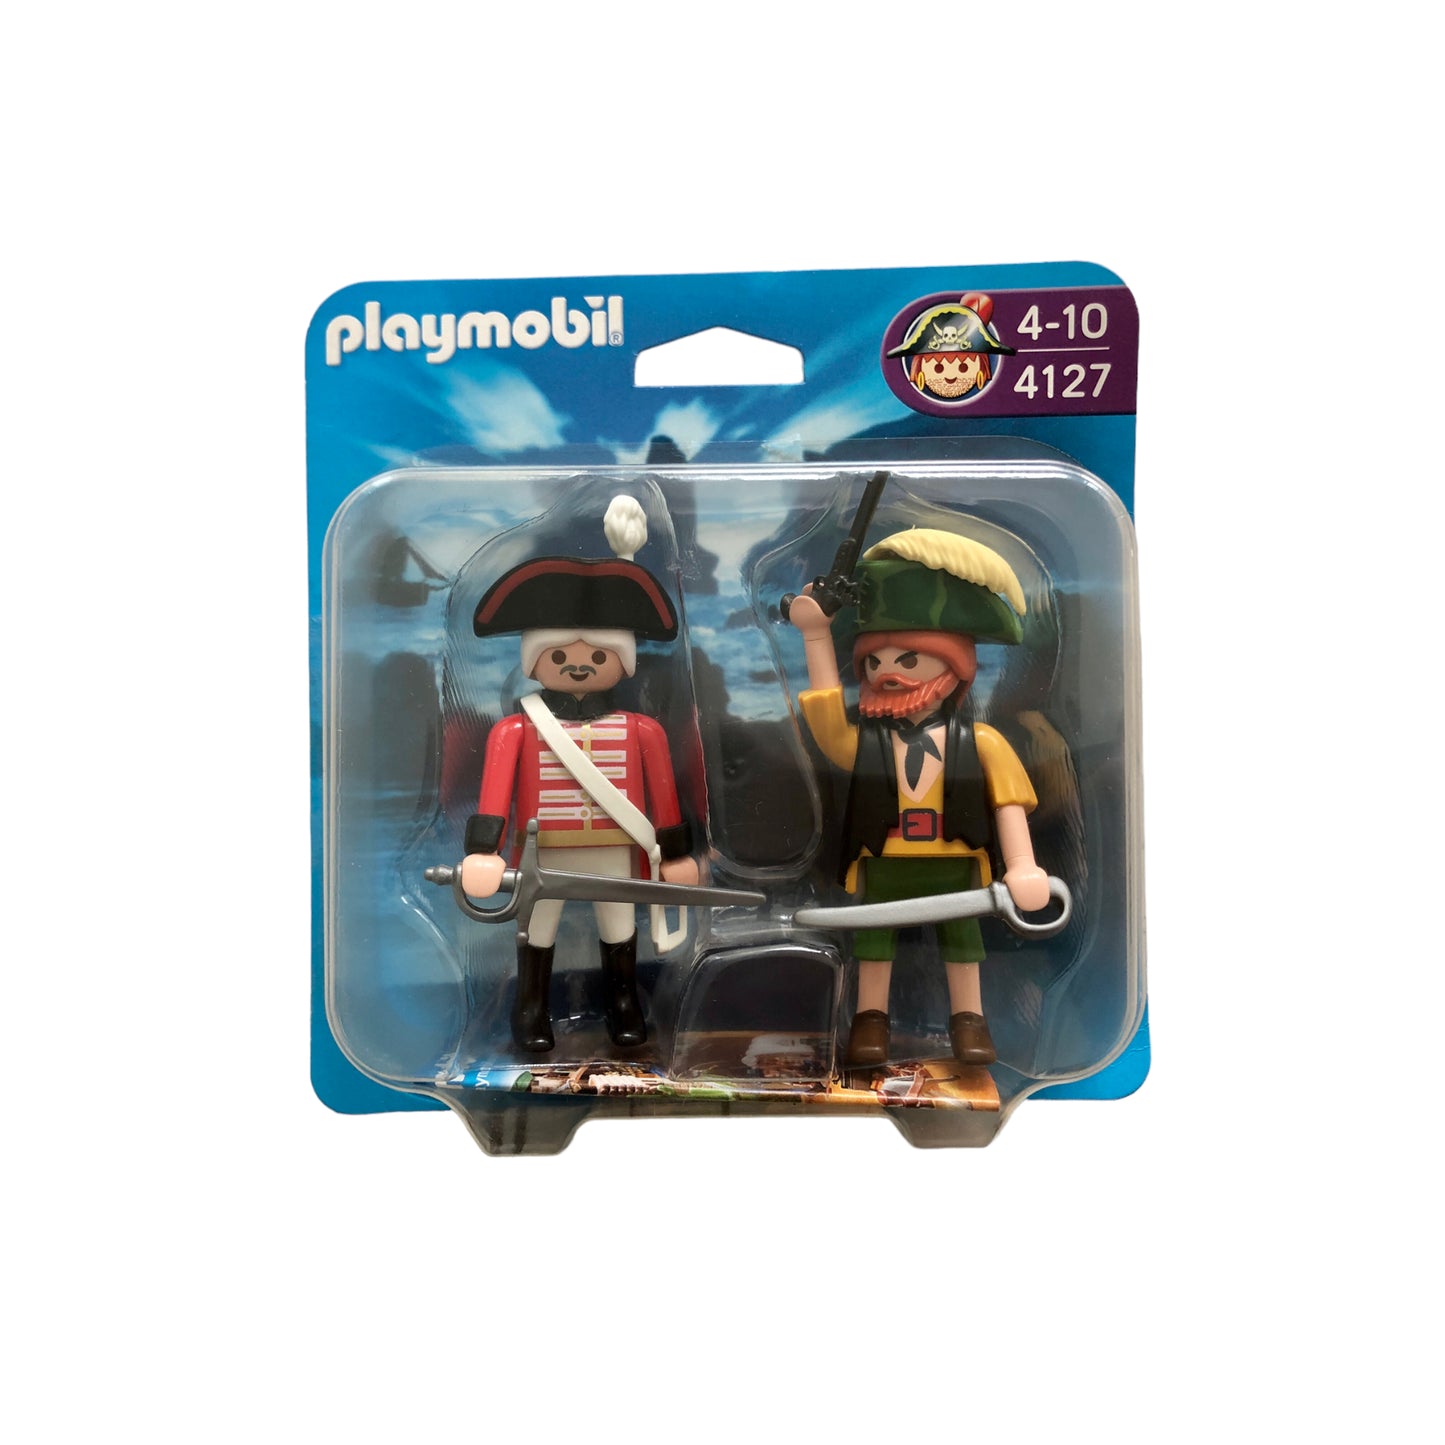 Playmobil - Pirate captain and Redcoat